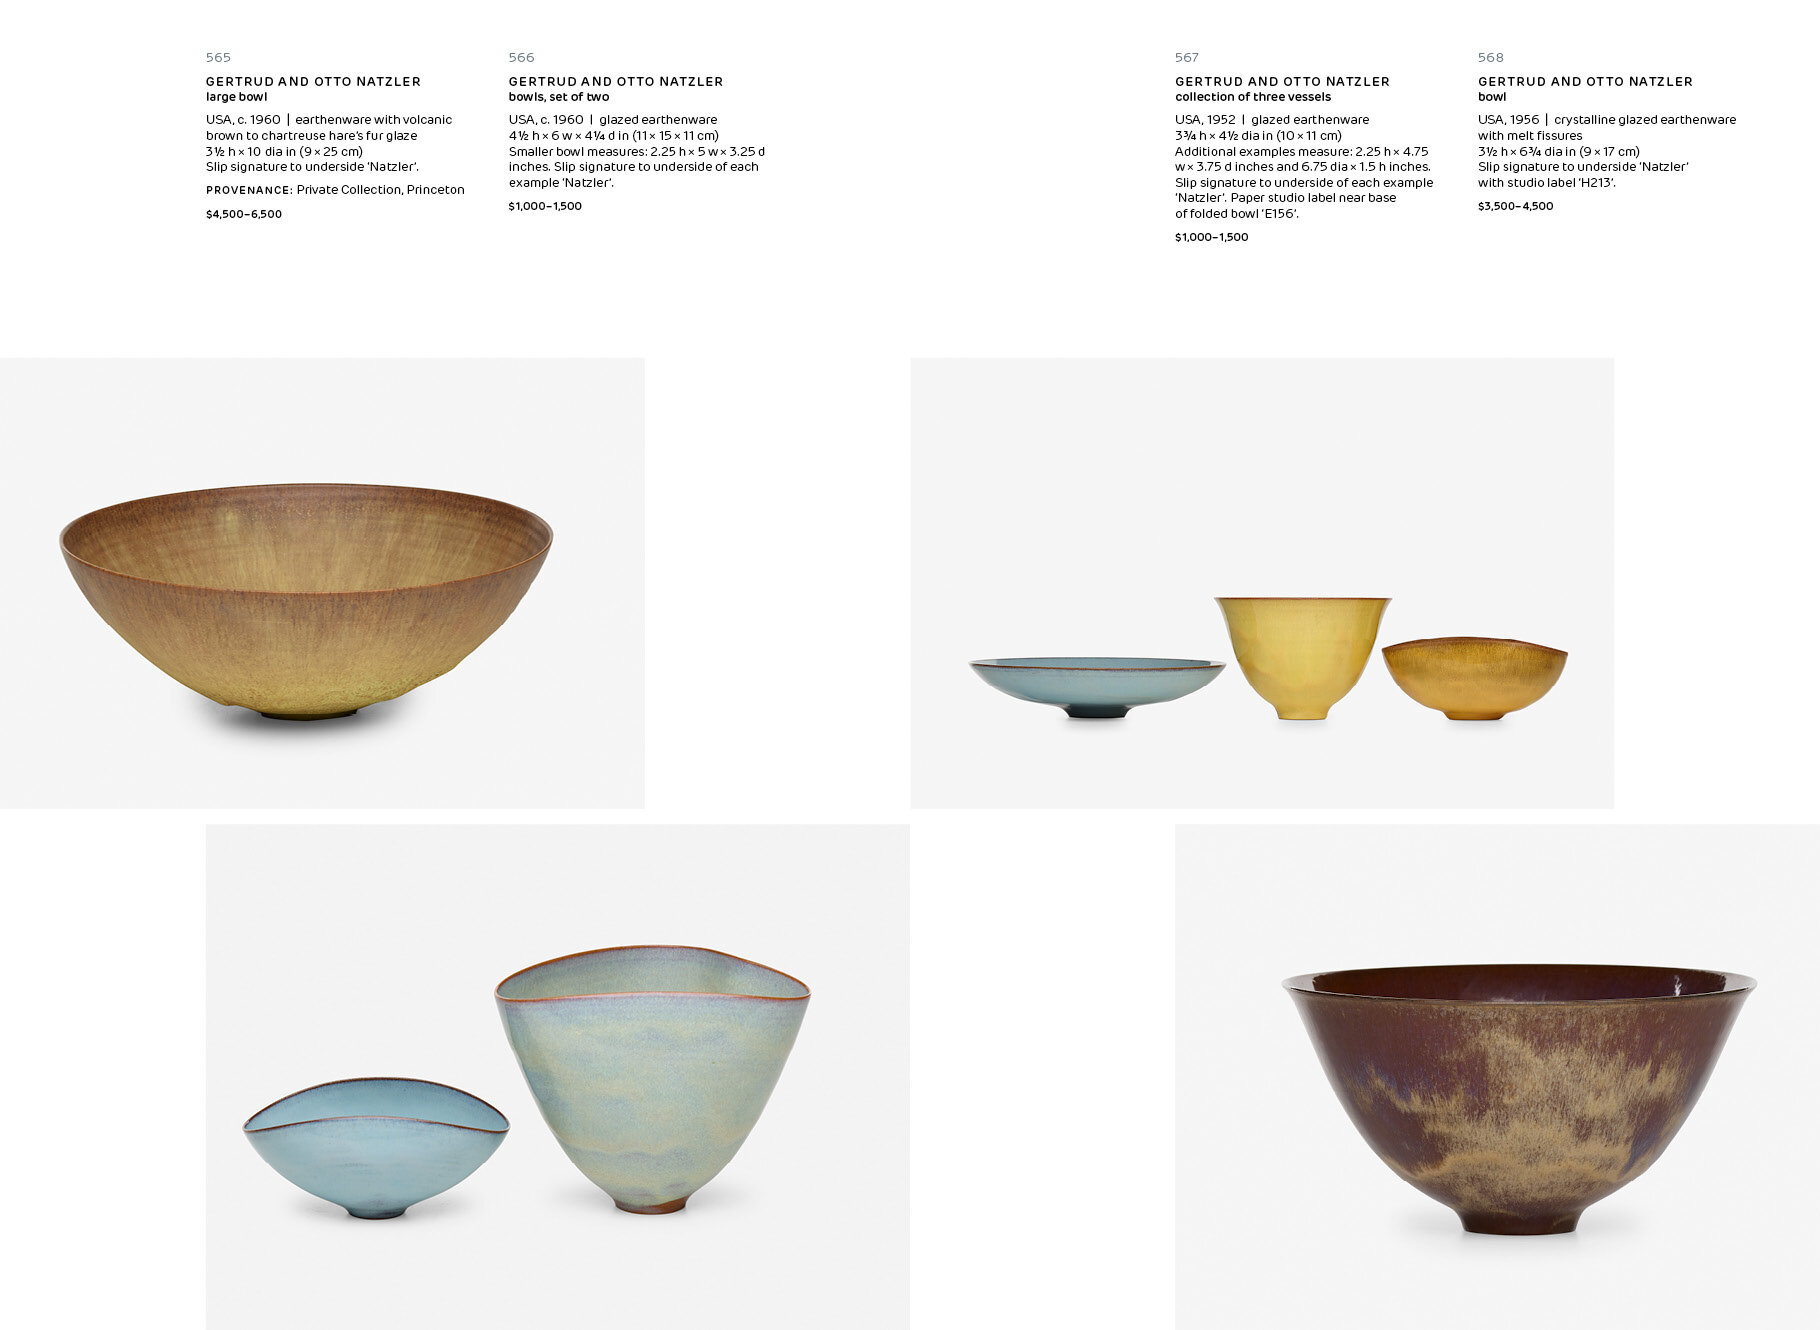 580: GERTRUD AND OTTO NATZLER, Conical bowl with base < Modern